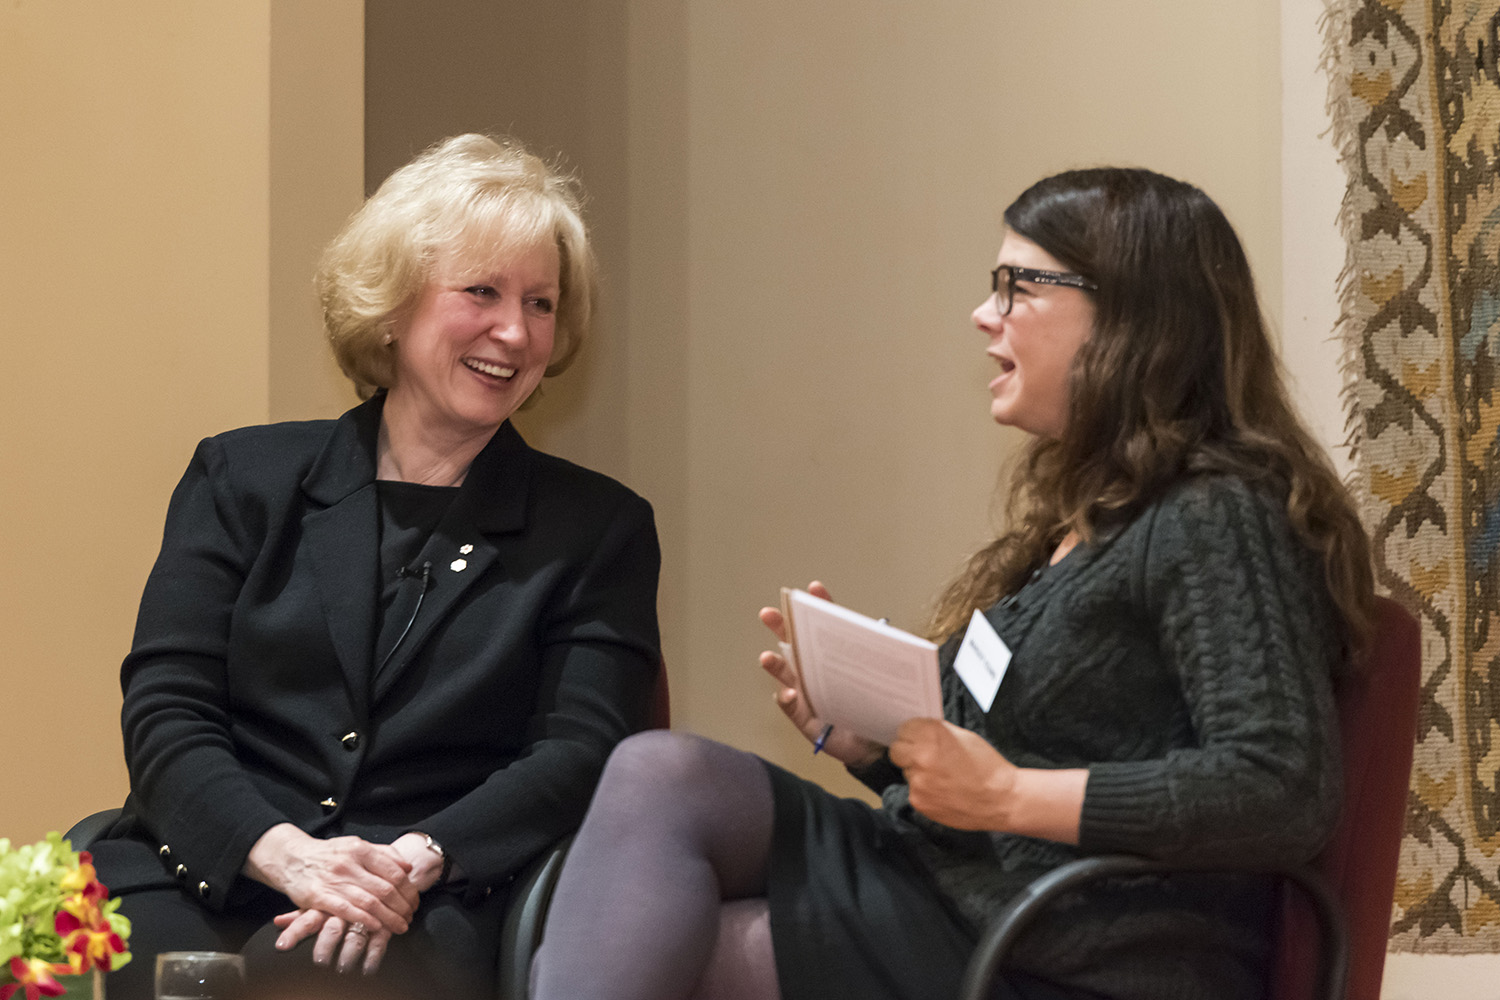 Kim Campbell sits down with Margot Young, Associate Professor of Law at the University of British Columbia, for an on-stage conversation following the Ismaili Centre lecture. Azim Verjee